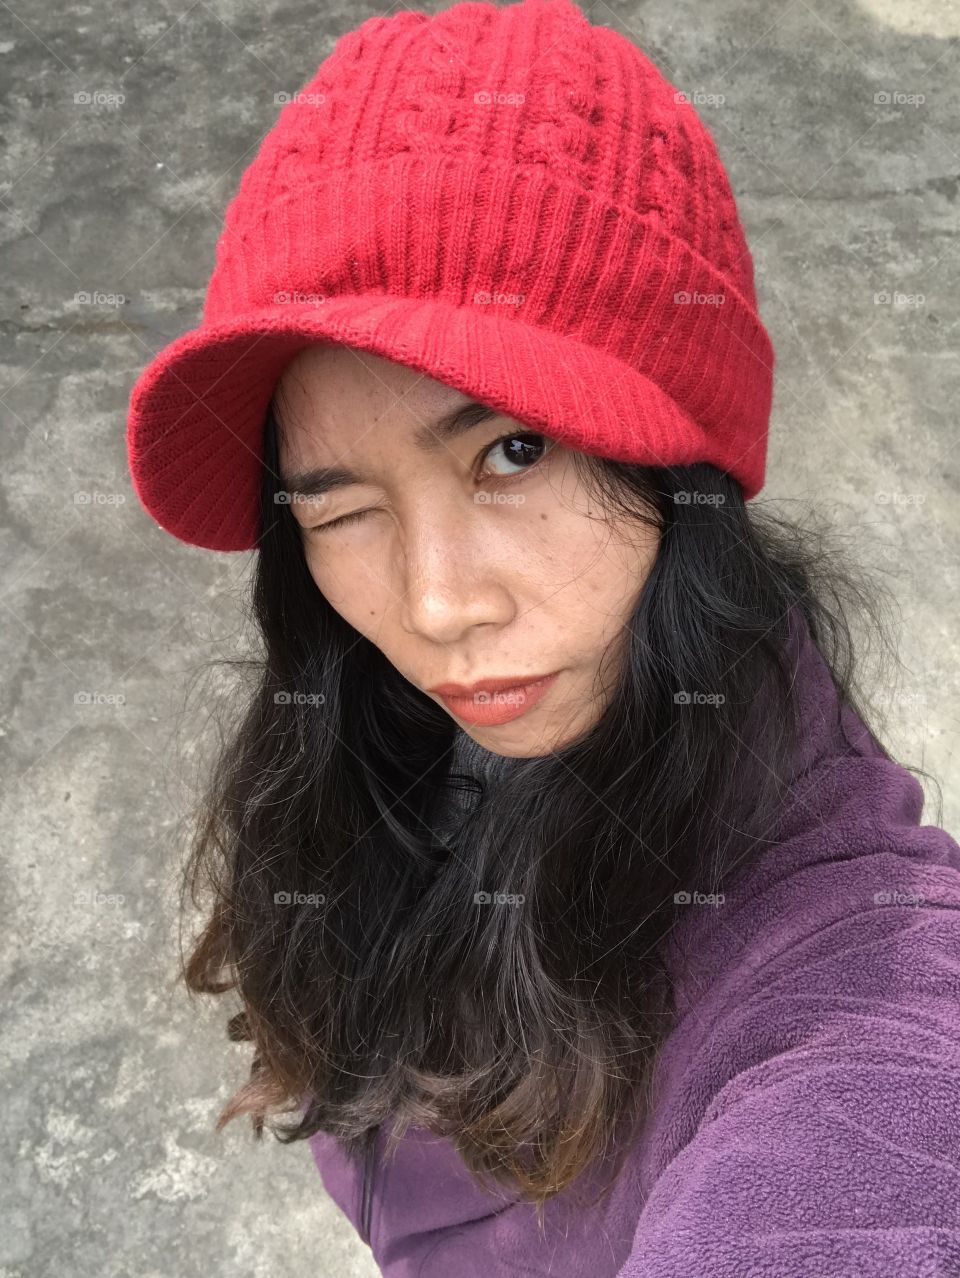 Red cap, black hair and red lip